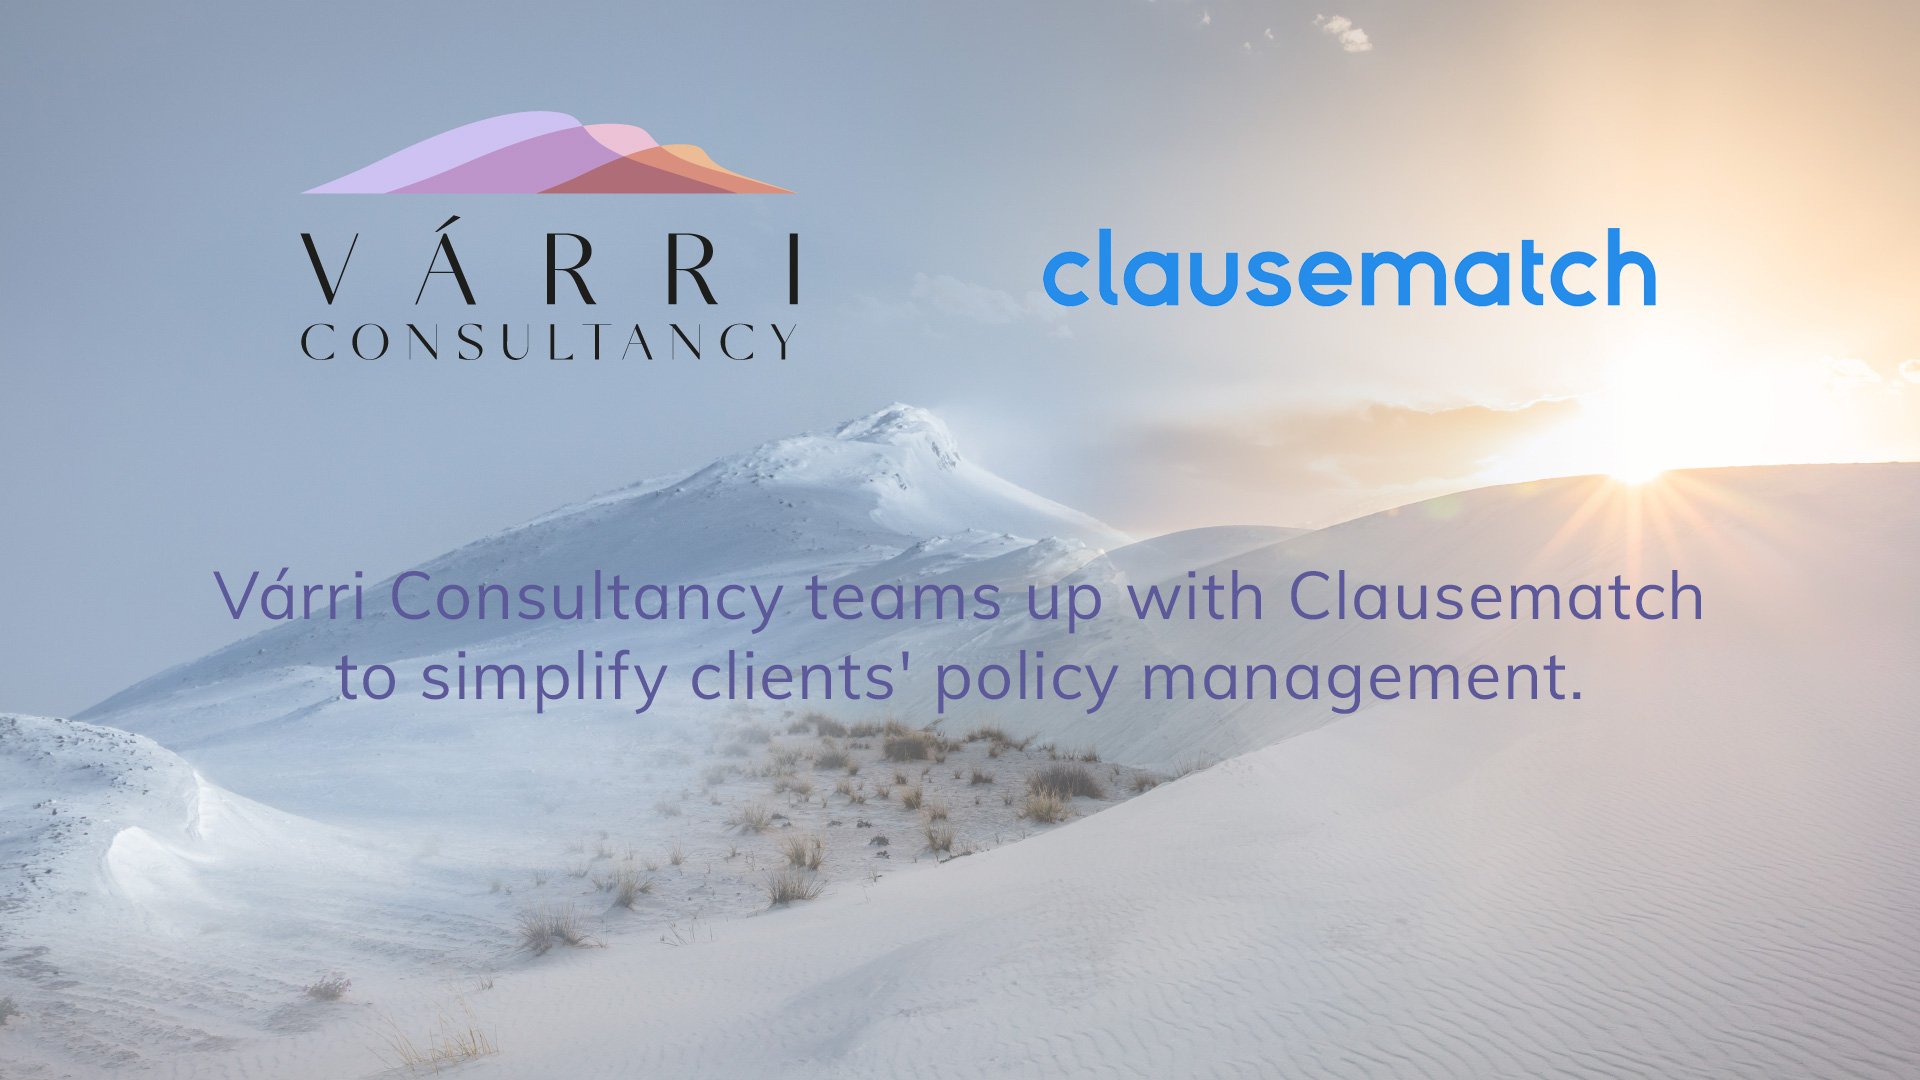 Várri Consultancy and Clausematch logos and partnership announcement on a desert and mountain backdrop.